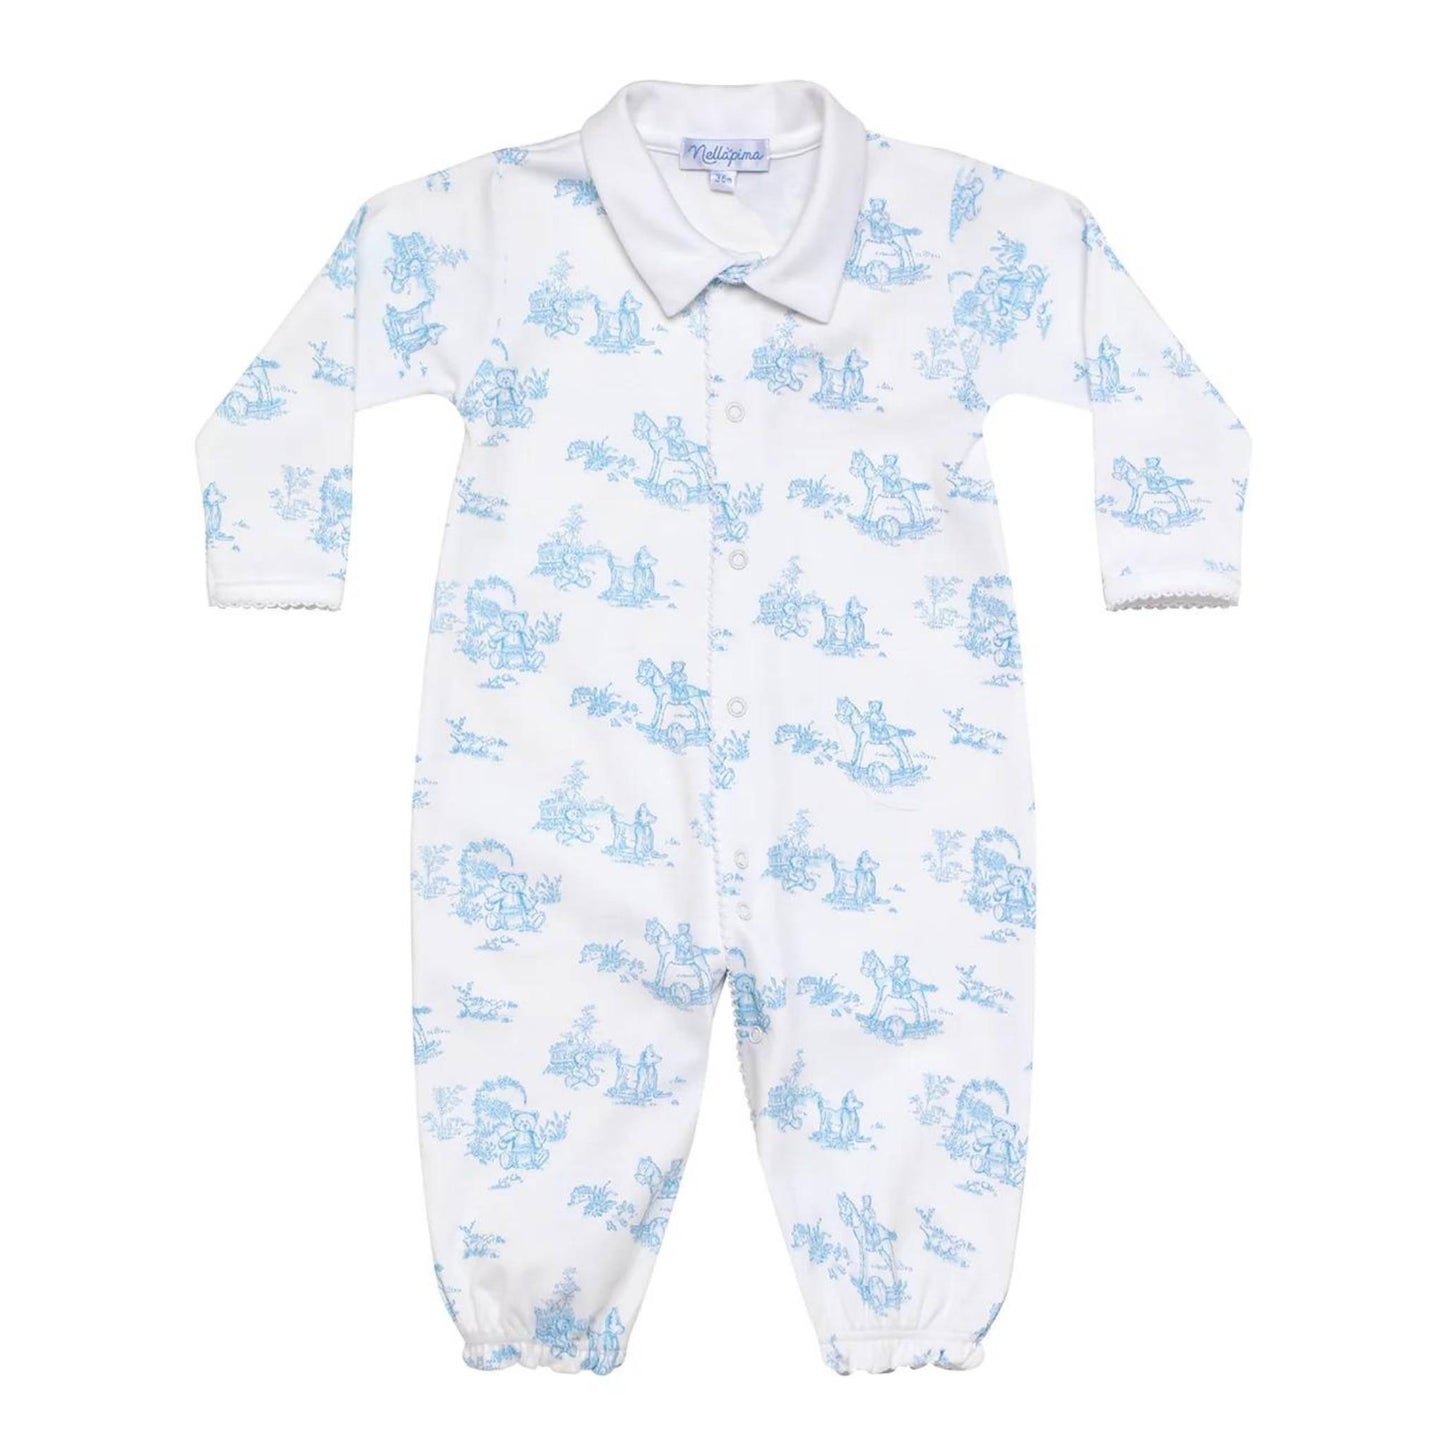 Boys Toile Converter Gown